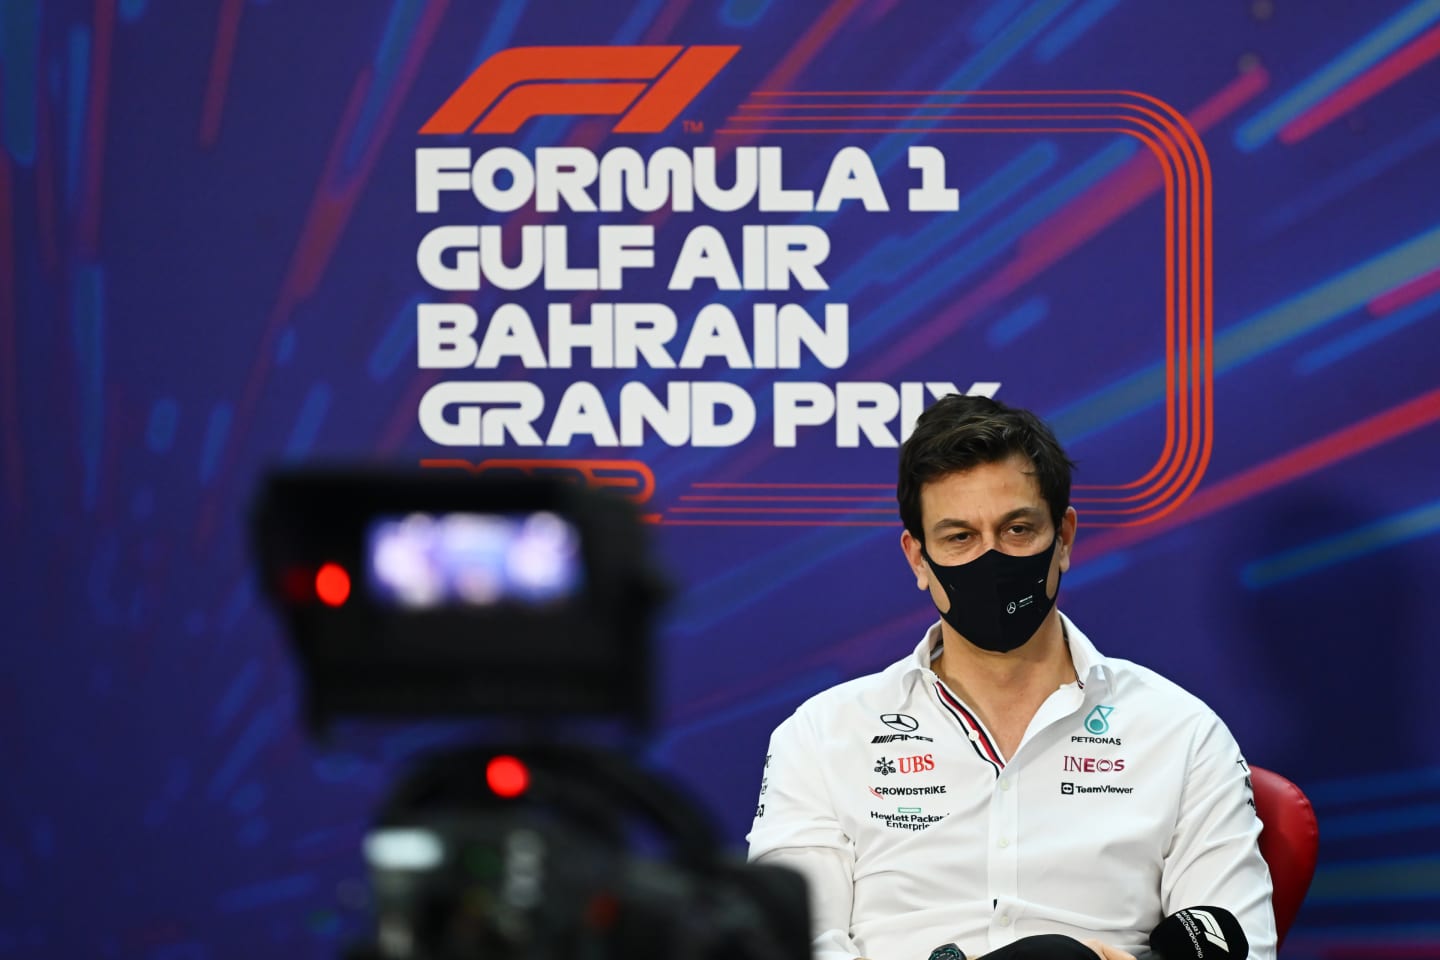 BAHRAIN, BAHRAIN - MARCH 19: Mercedes GP Executive Director Toto Wolff talks in the Team Principals Press Conference before final practice ahead of the F1 Grand Prix of Bahrain at Bahrain International Circuit on March 19, 2022 in Bahrain, Bahrain. (Photo by Clive Mason/Getty Images)